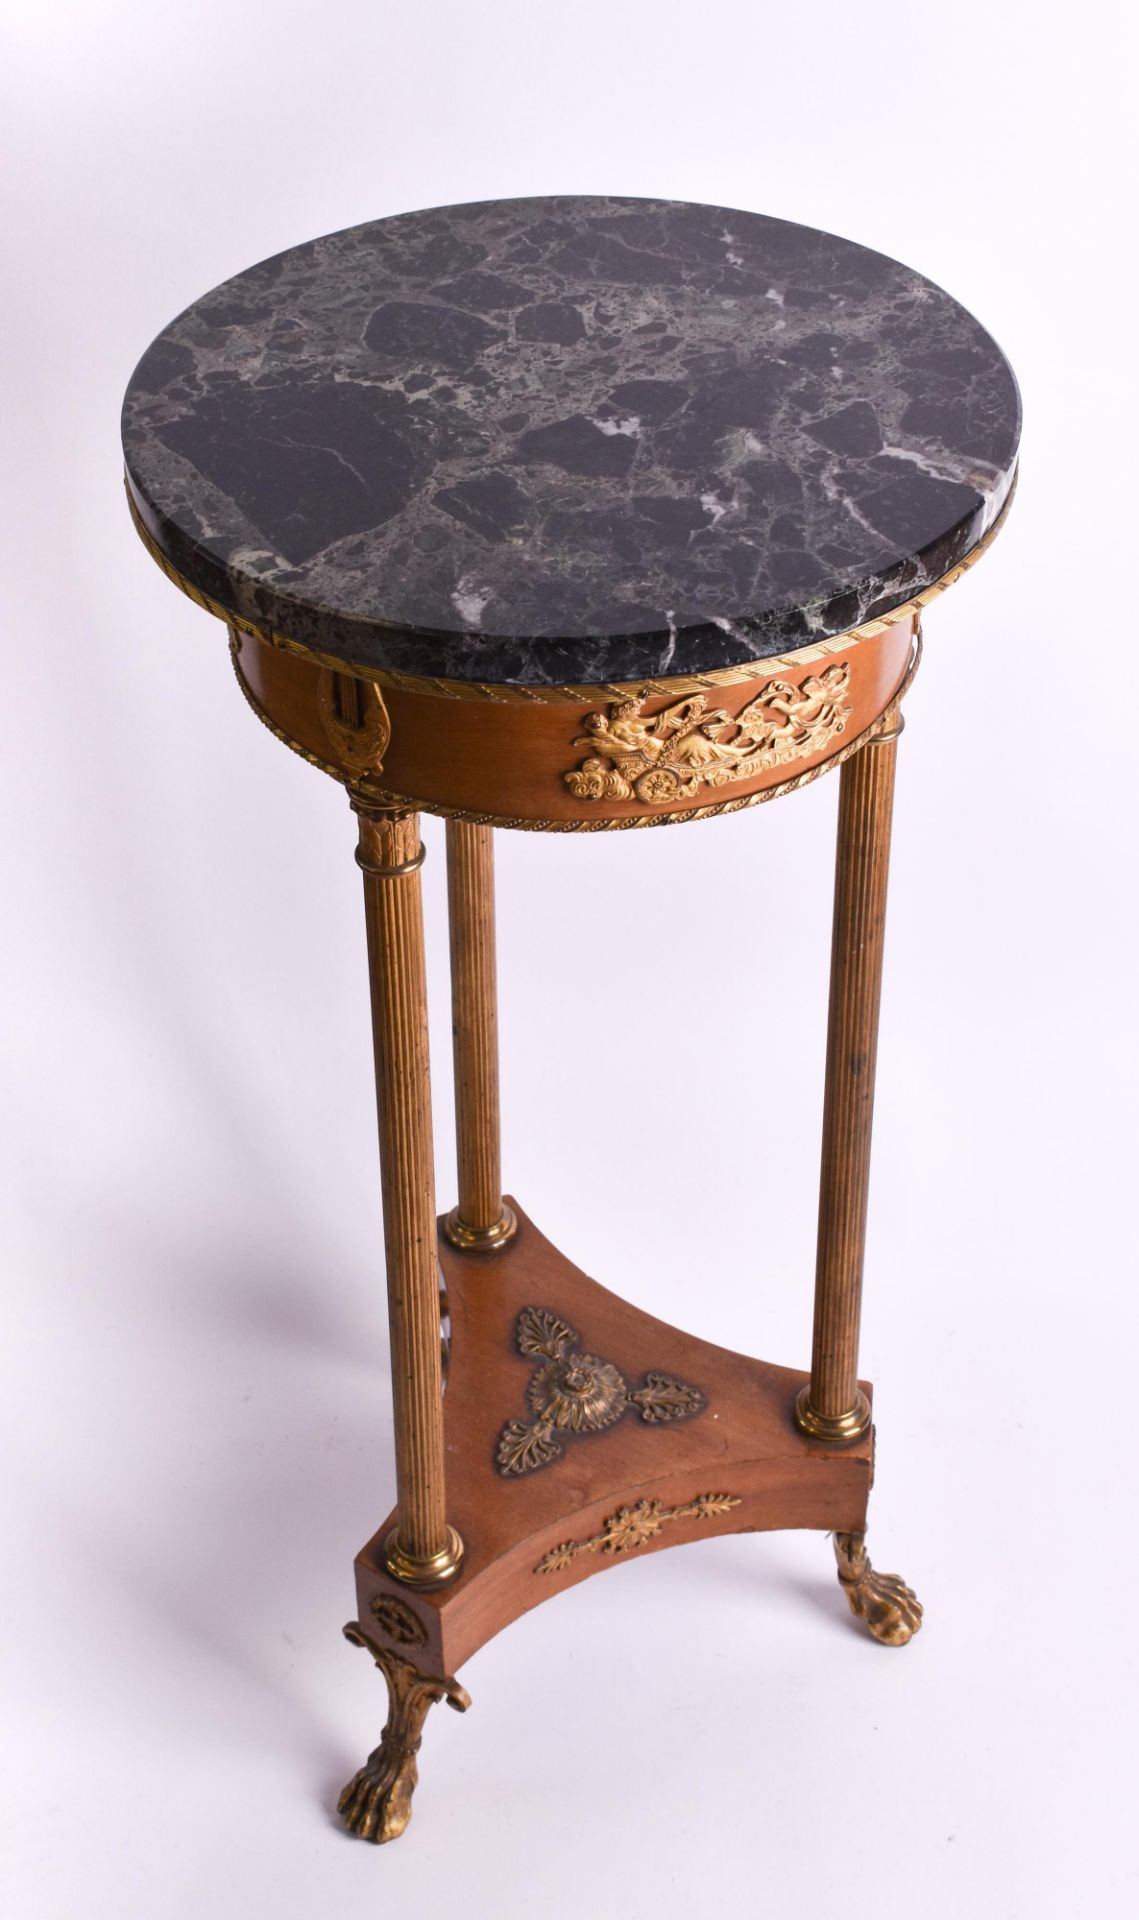 Empire side table made of beech wood & marble, 20th century - Image 4 of 4